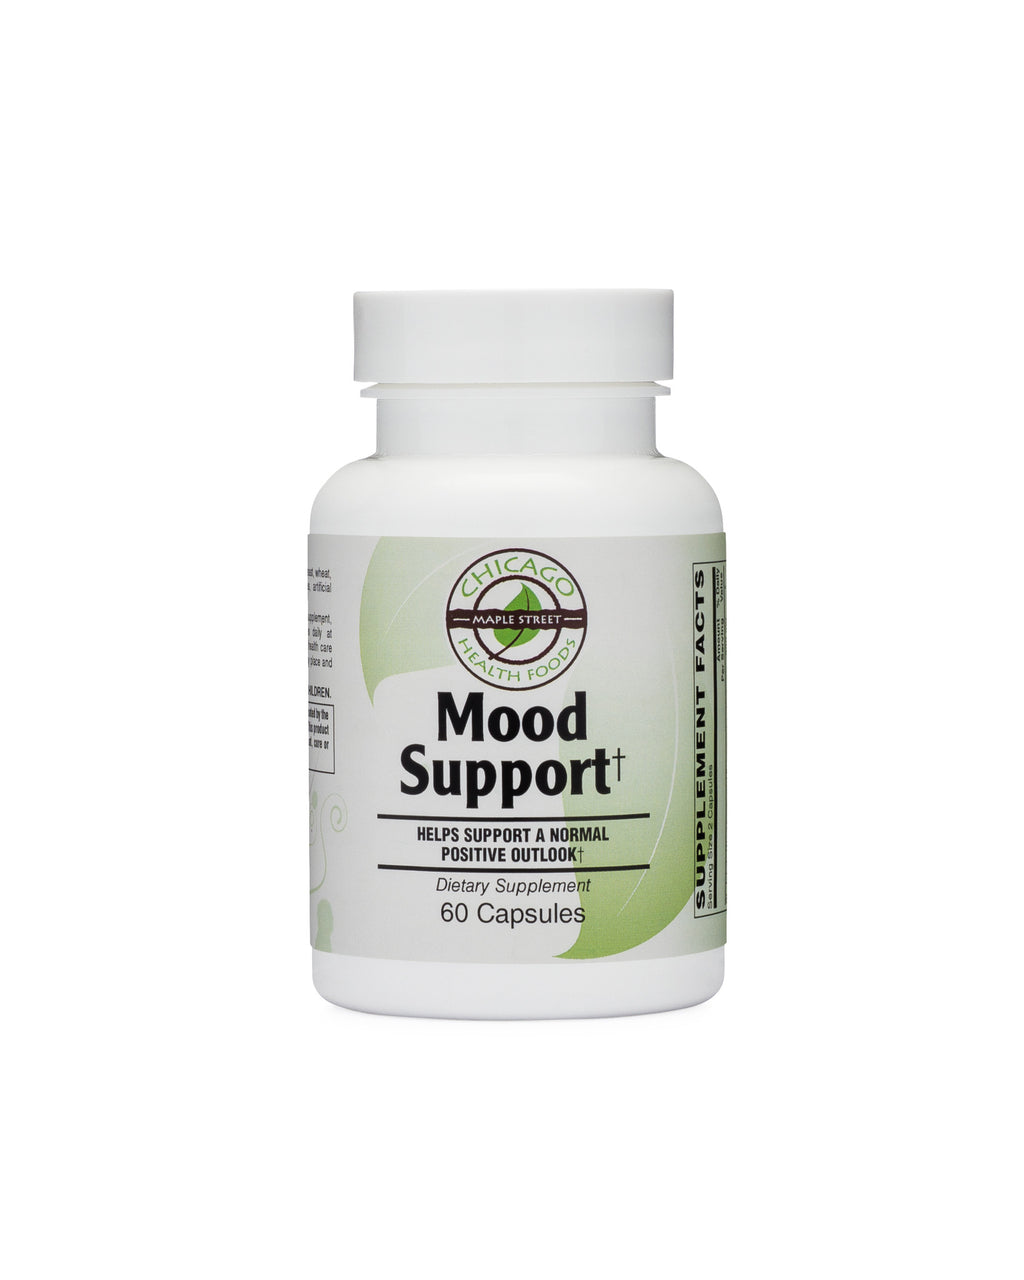 Mood Support helps support positive outlook 60 capsules chicago health